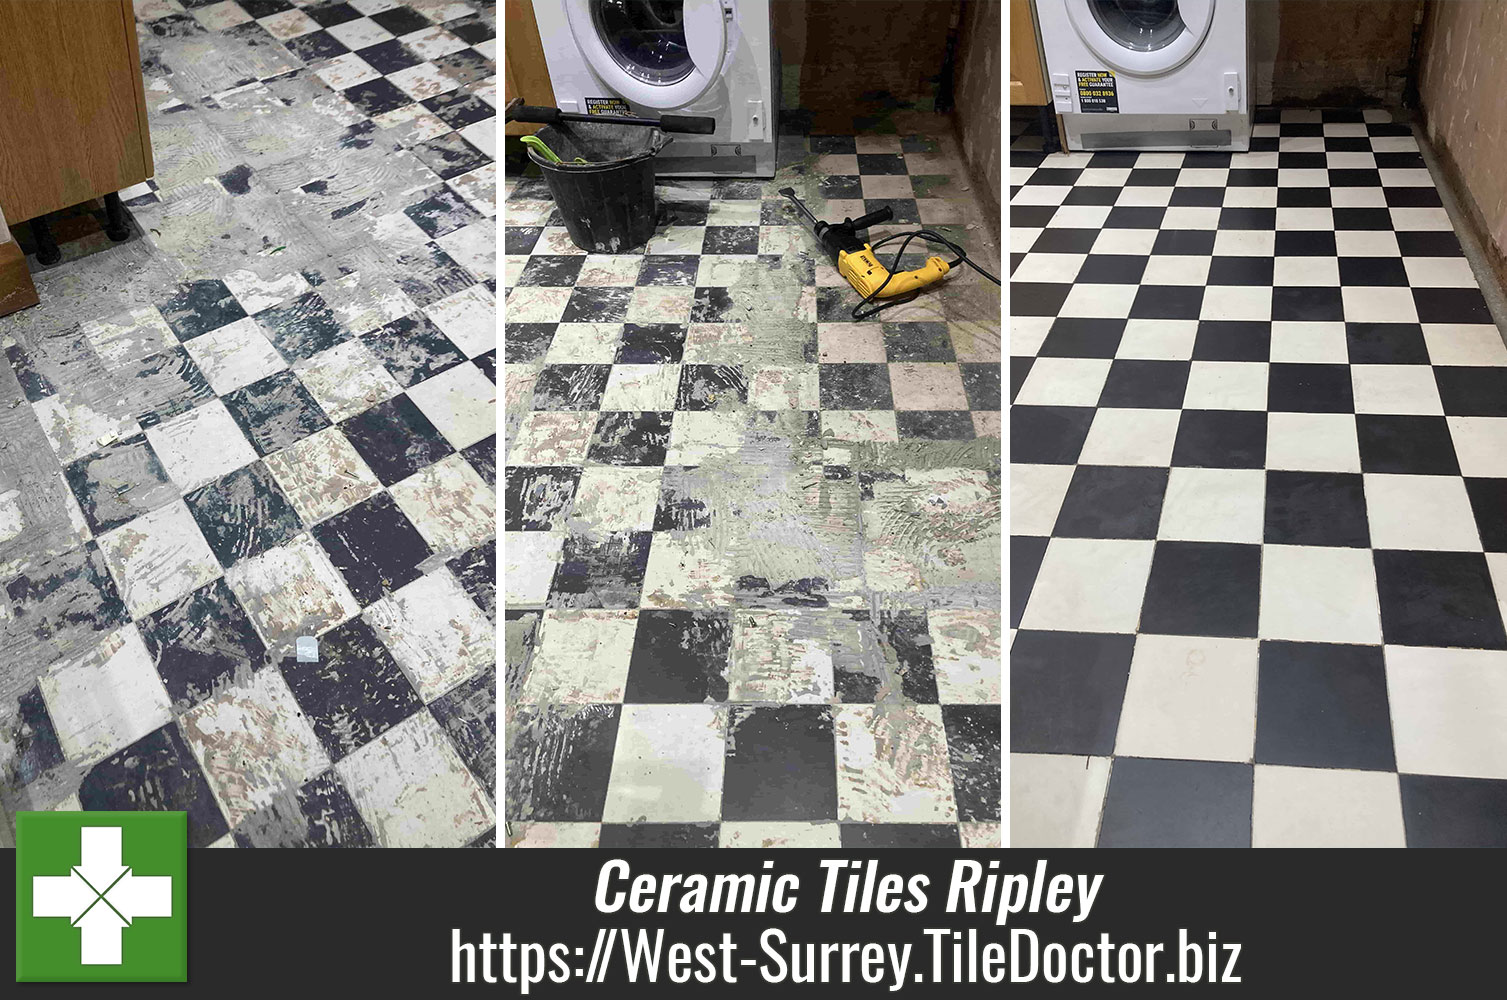 Removing Glue from Classic Ceramic Floor Tiles in Ripley Surrey